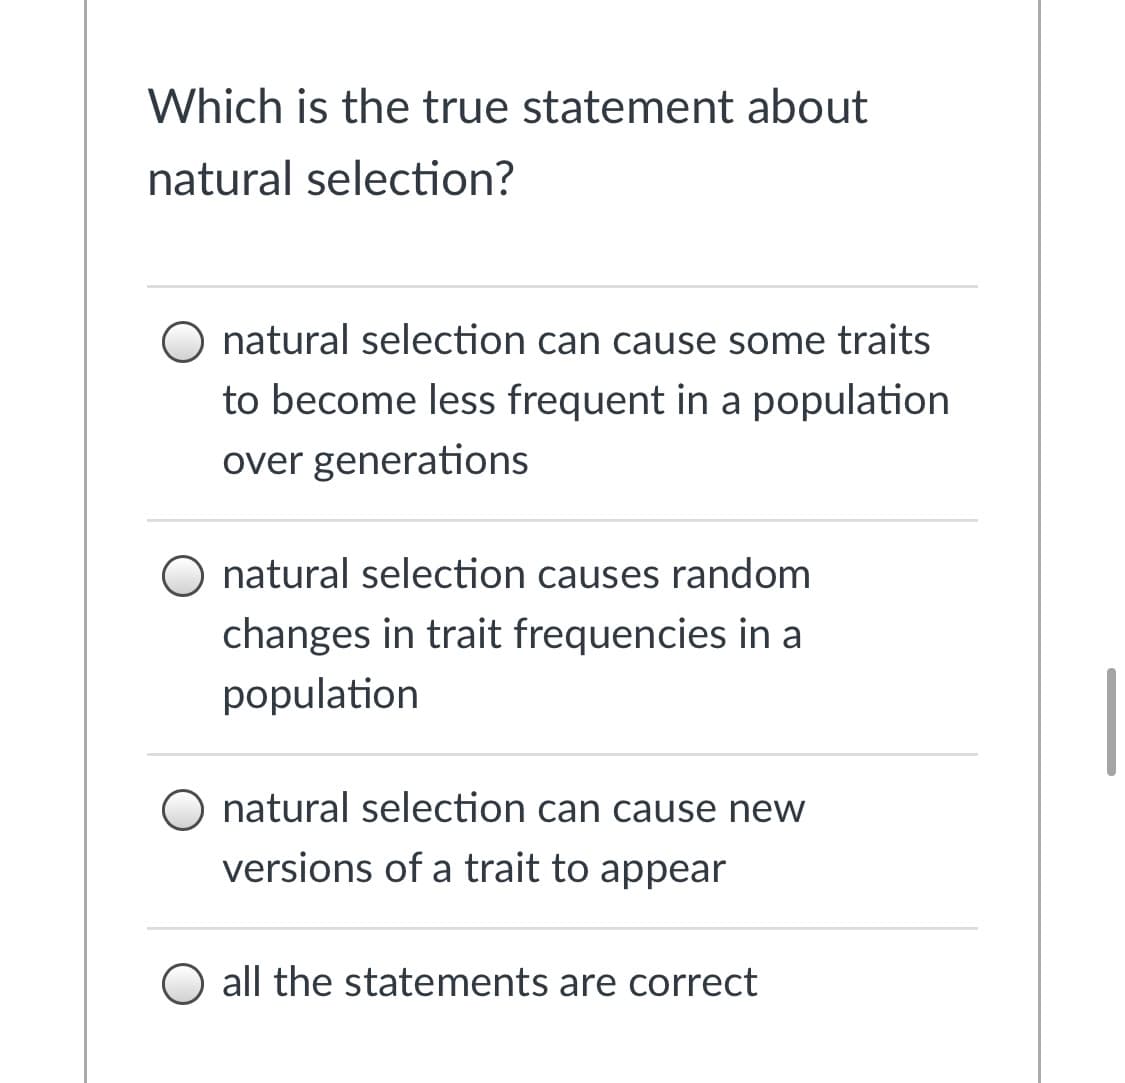 Which is the true statement about
natural selection?
O natural selection can cause some traits
to become less frequent in a population
over generations
O natural selection causes random
changes in trait frequencies in a
population
O natural selection can cause new
versions of a trait to appear
all the statements are correct
